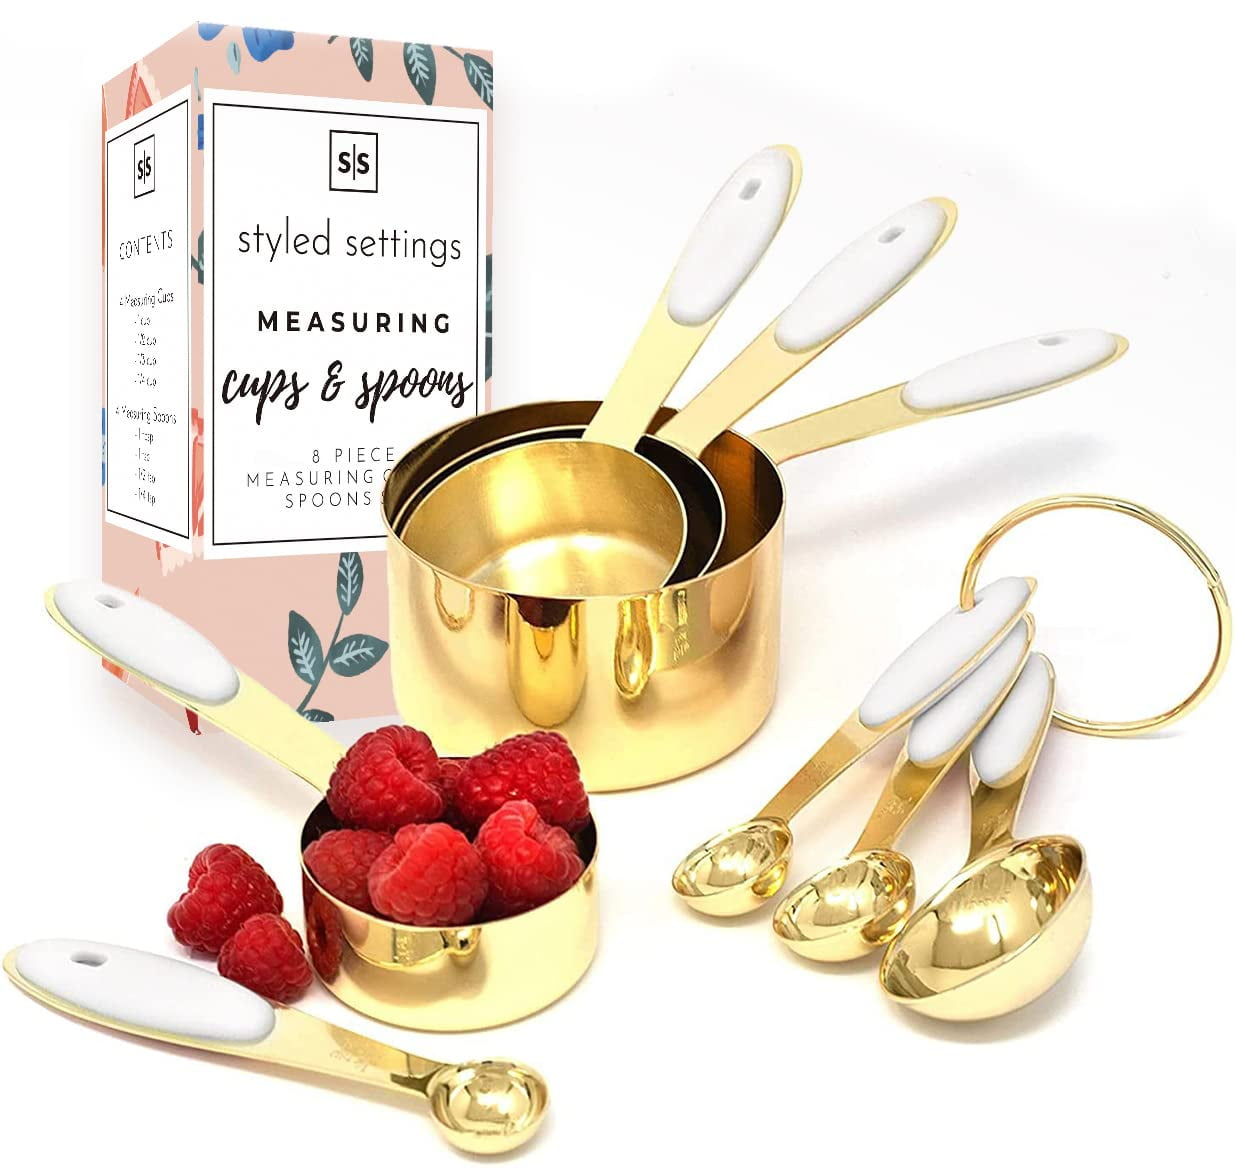 Styled Settings White & Gold Stainless Steel Measuring Cups and Spoons Set